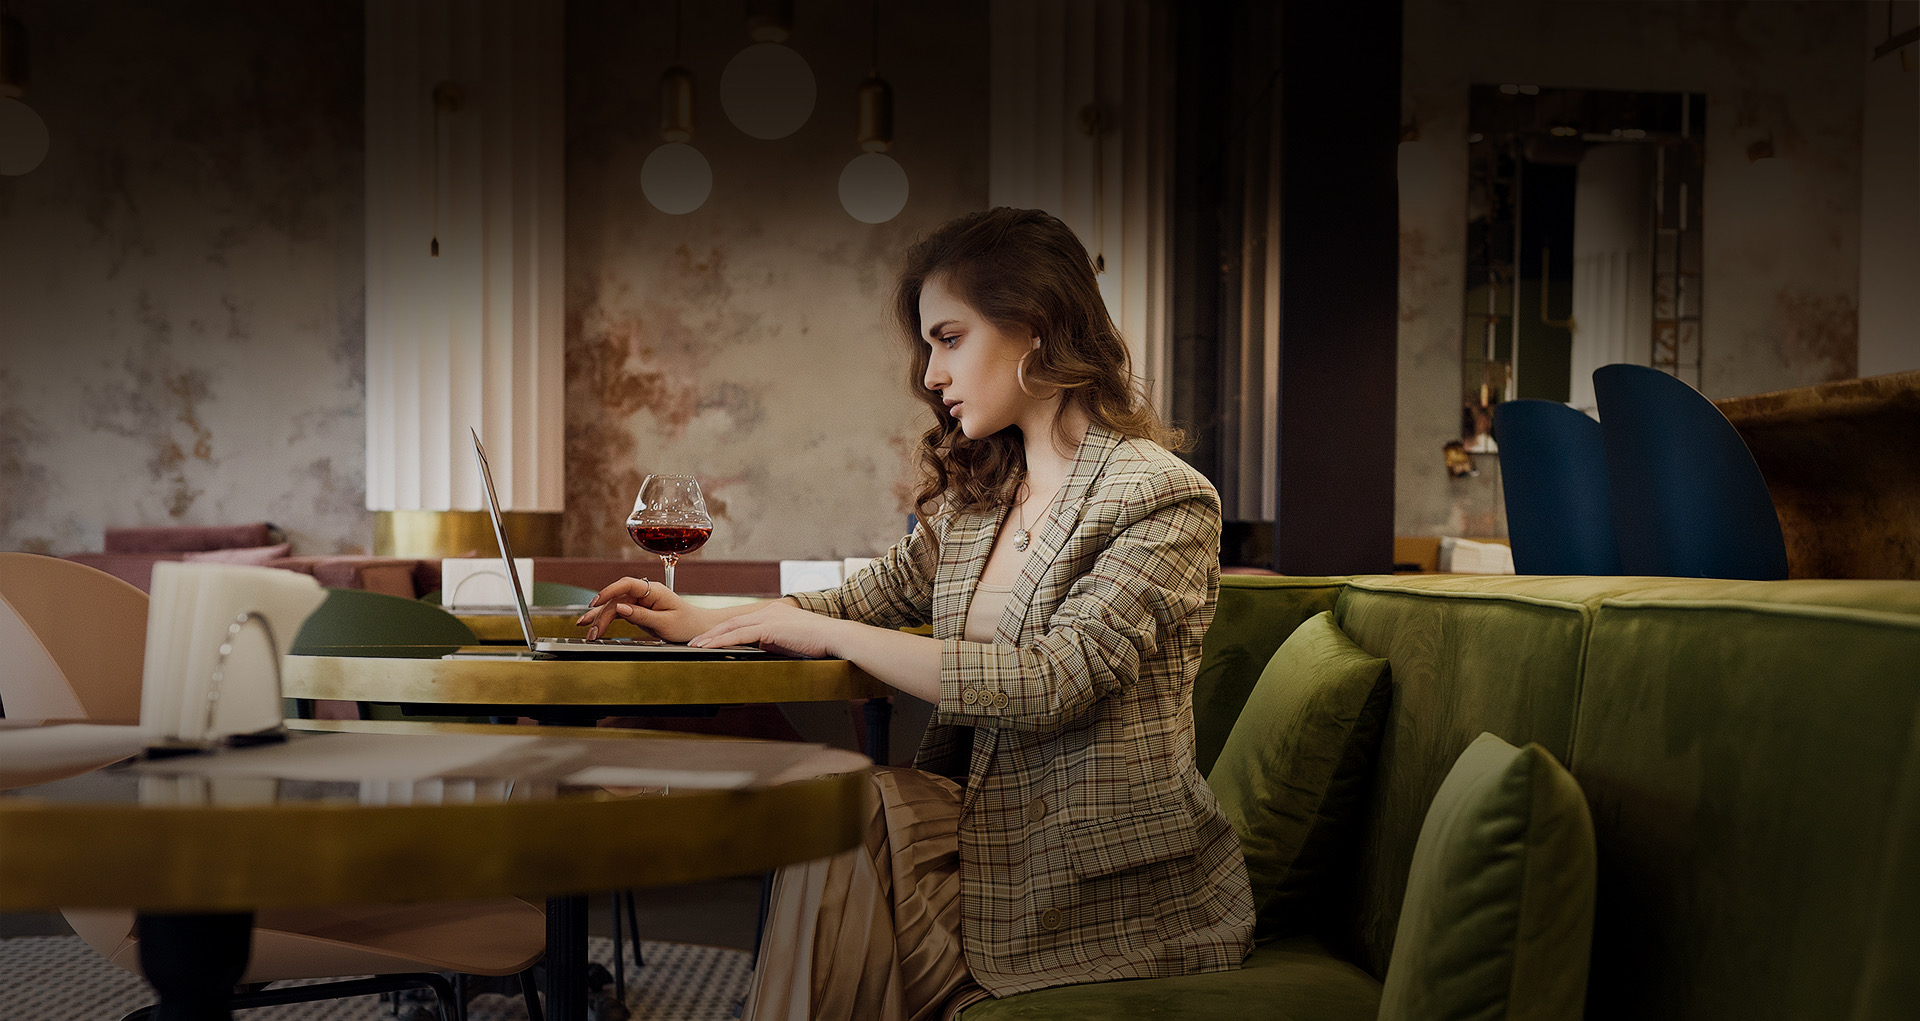 lady in business attire sitting in the dining area, working on her laptop with a side of red wine